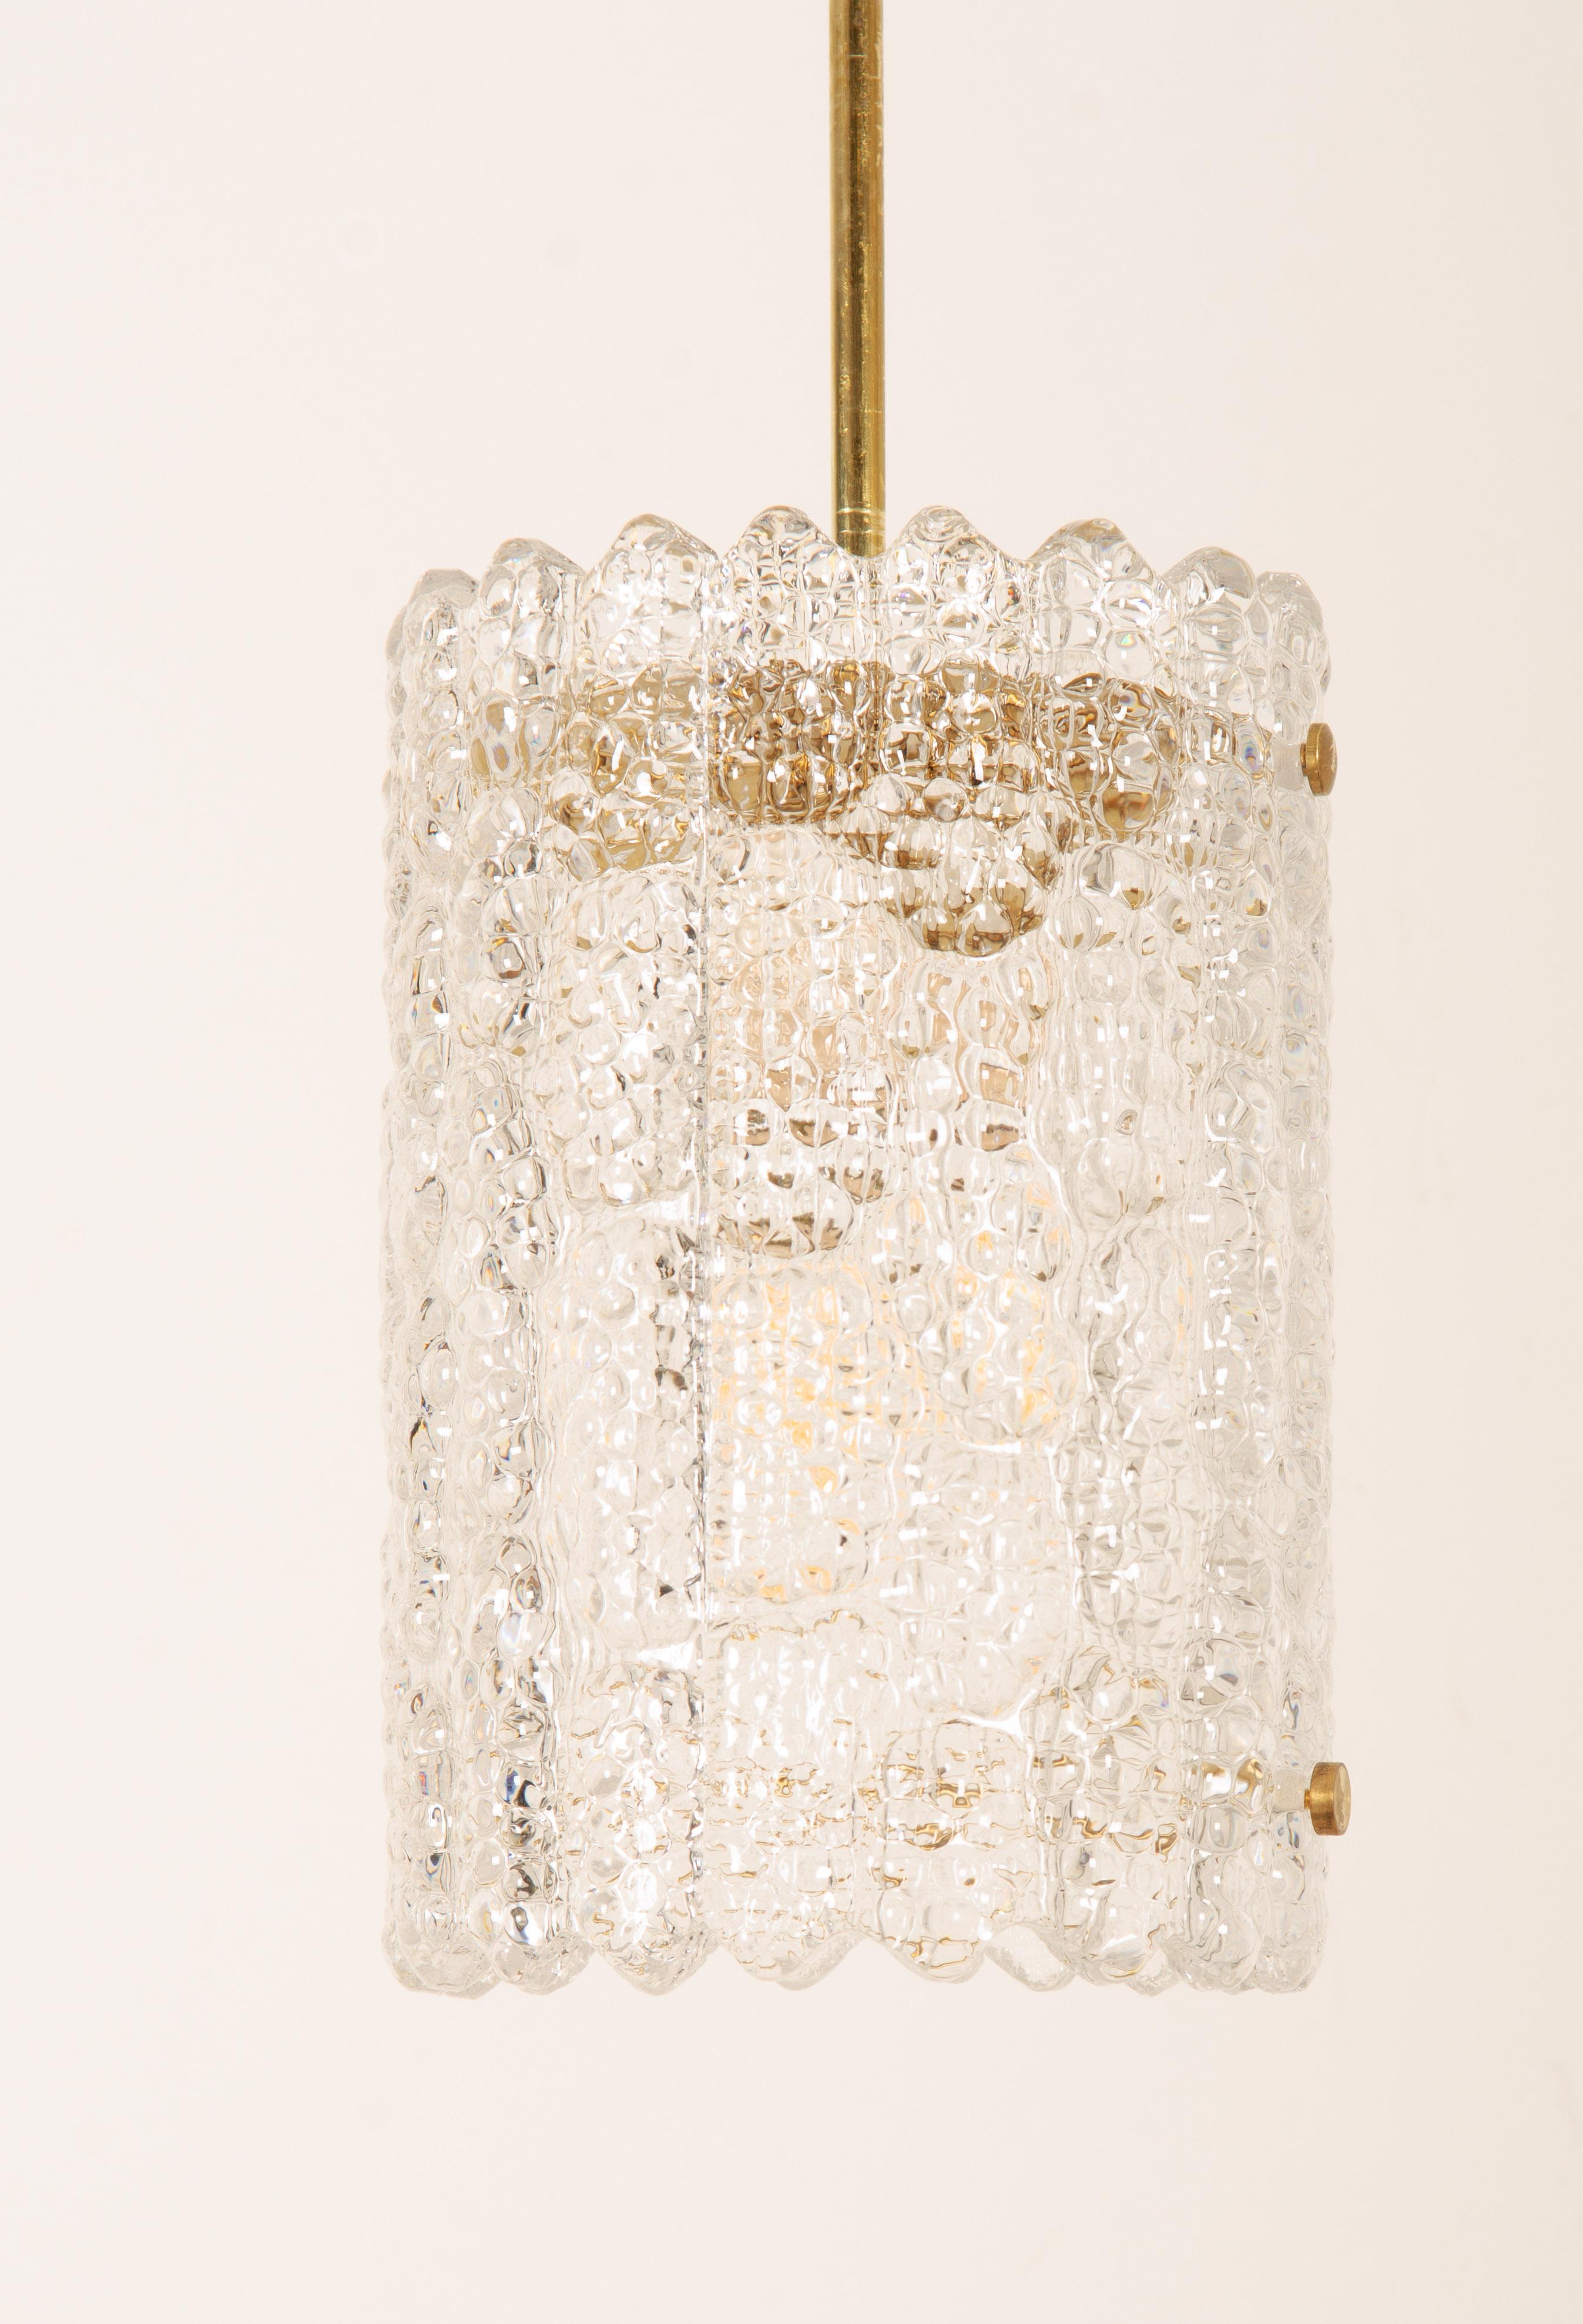 Brass frame with crystal glass shade, fitted with E27 socket, designed in the 1960s by Carl Fagerlund for Orrefors Glassworks Sweden, model 1322.
Total height including canopy is 20 inches. Glass only is 10 inches high by 7 inches diameter.
4 piexes